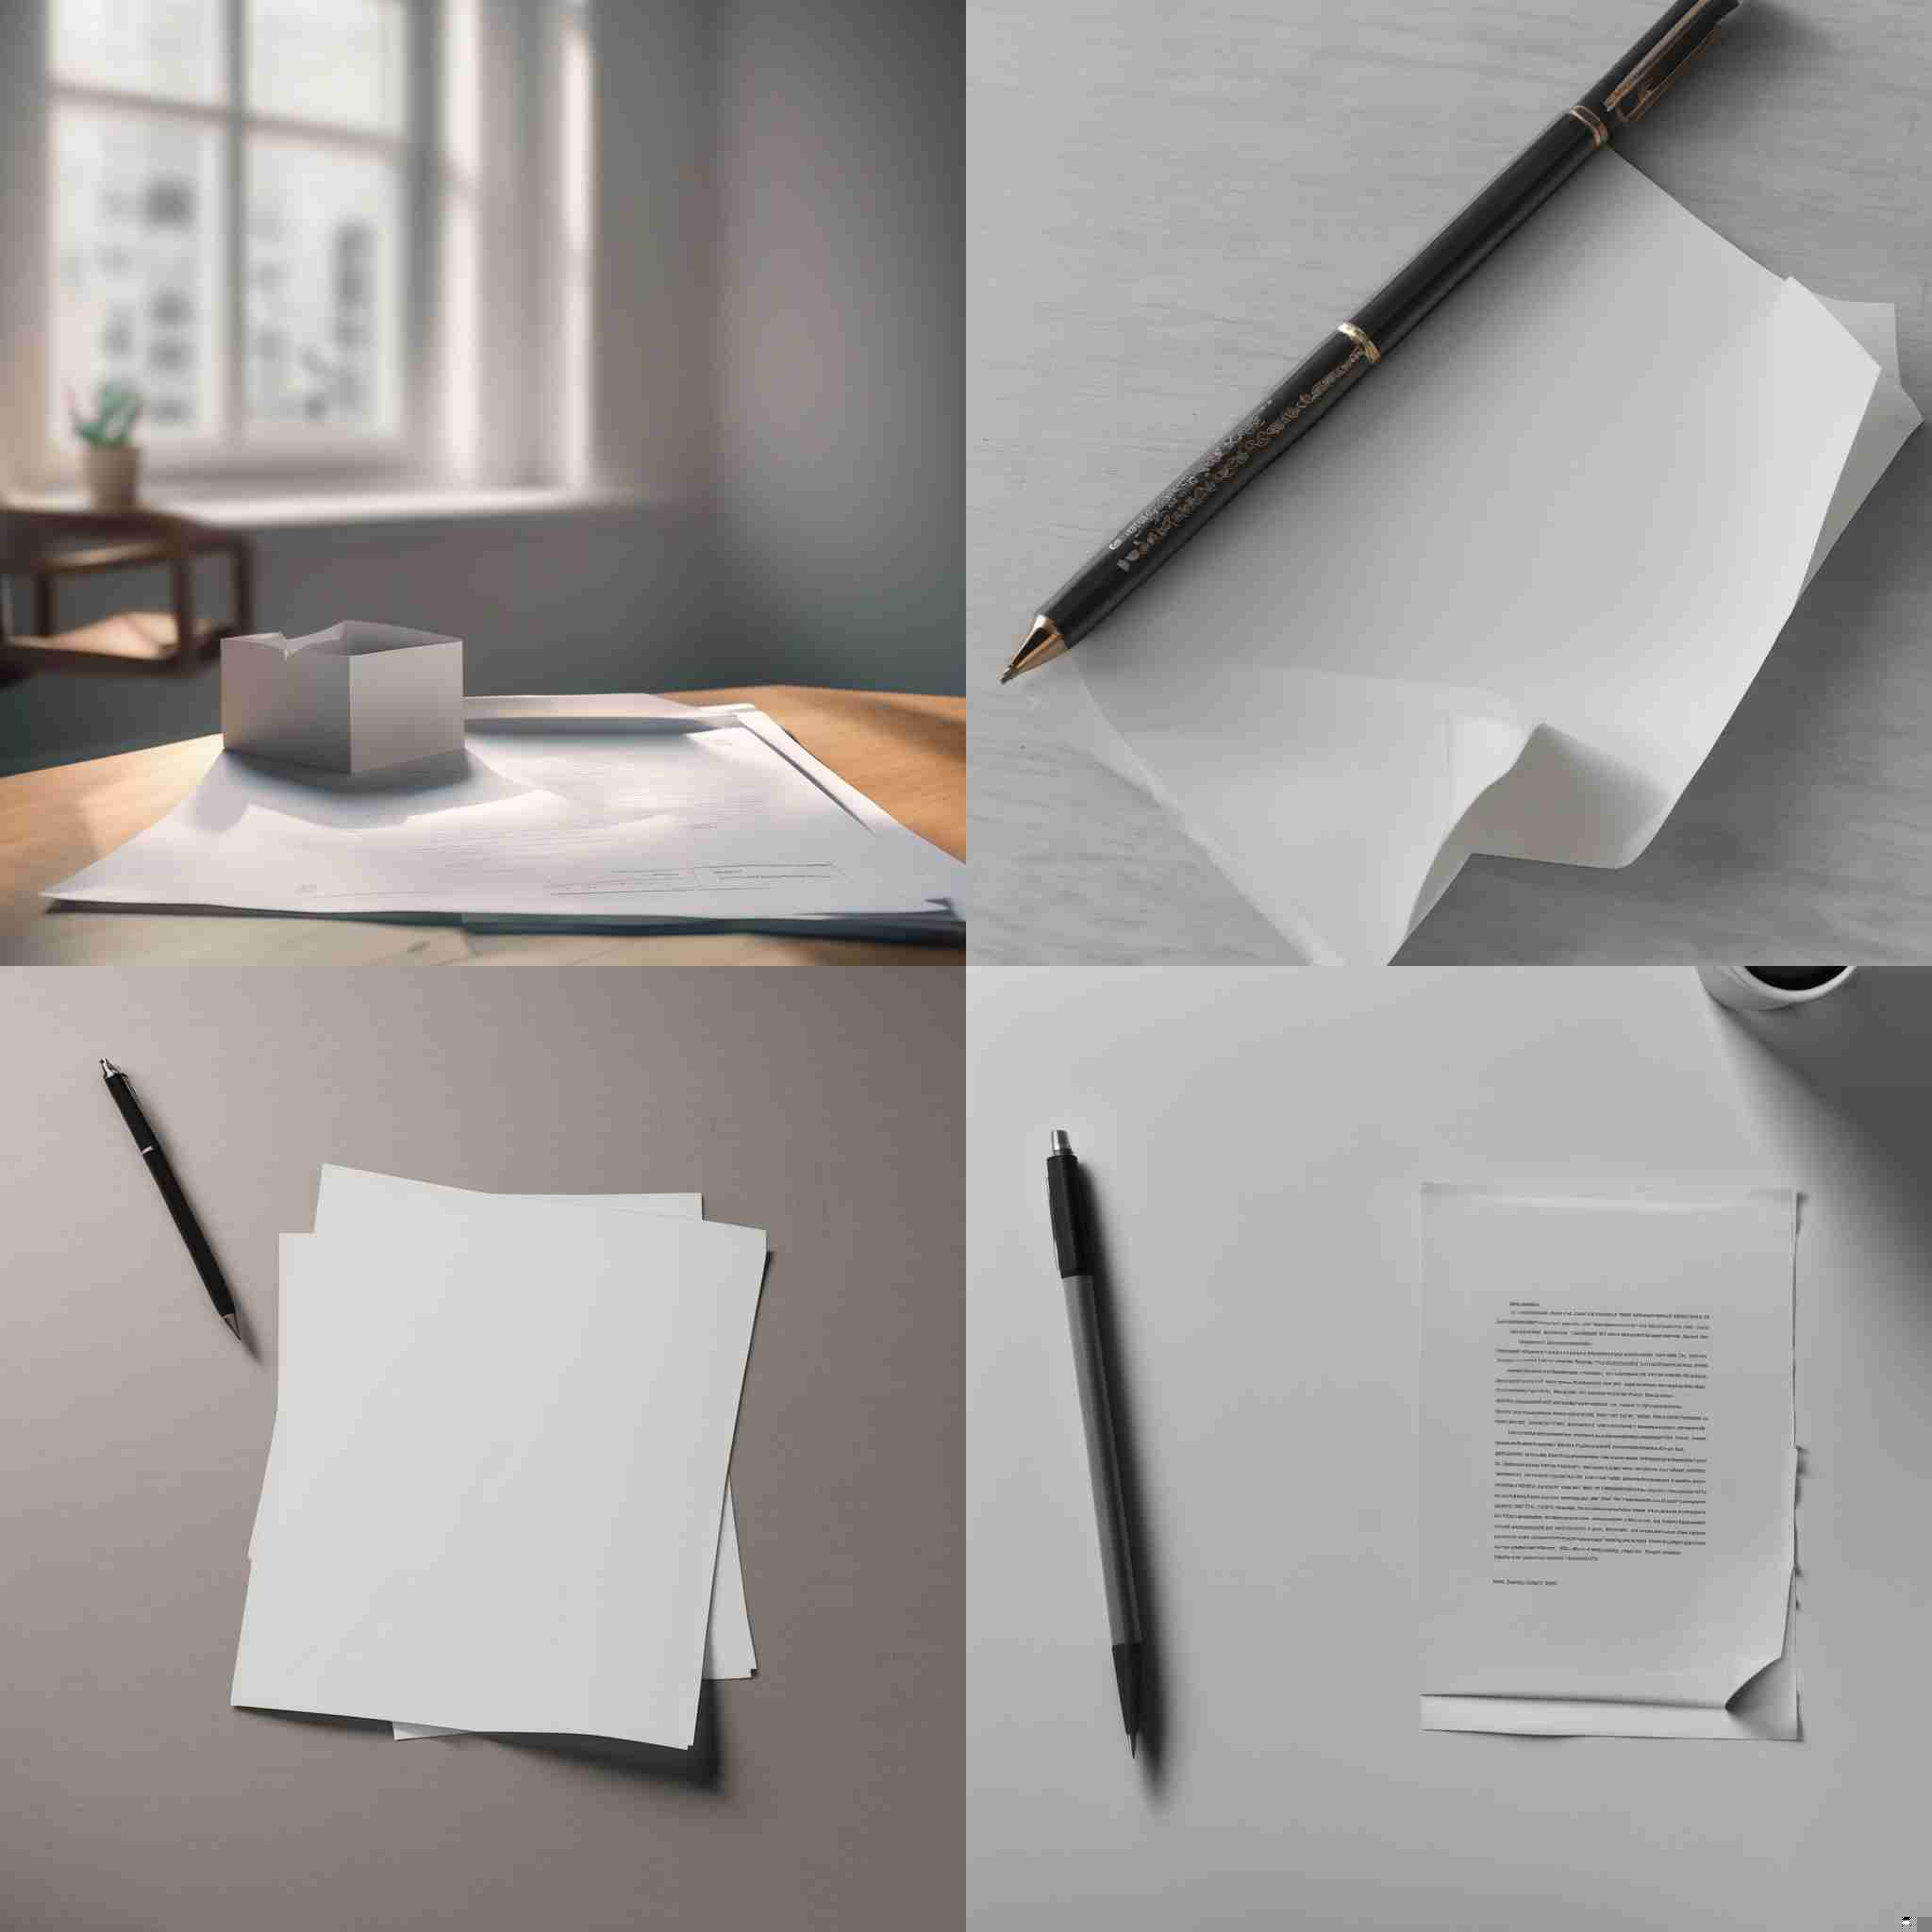 A piece of paper on a desk